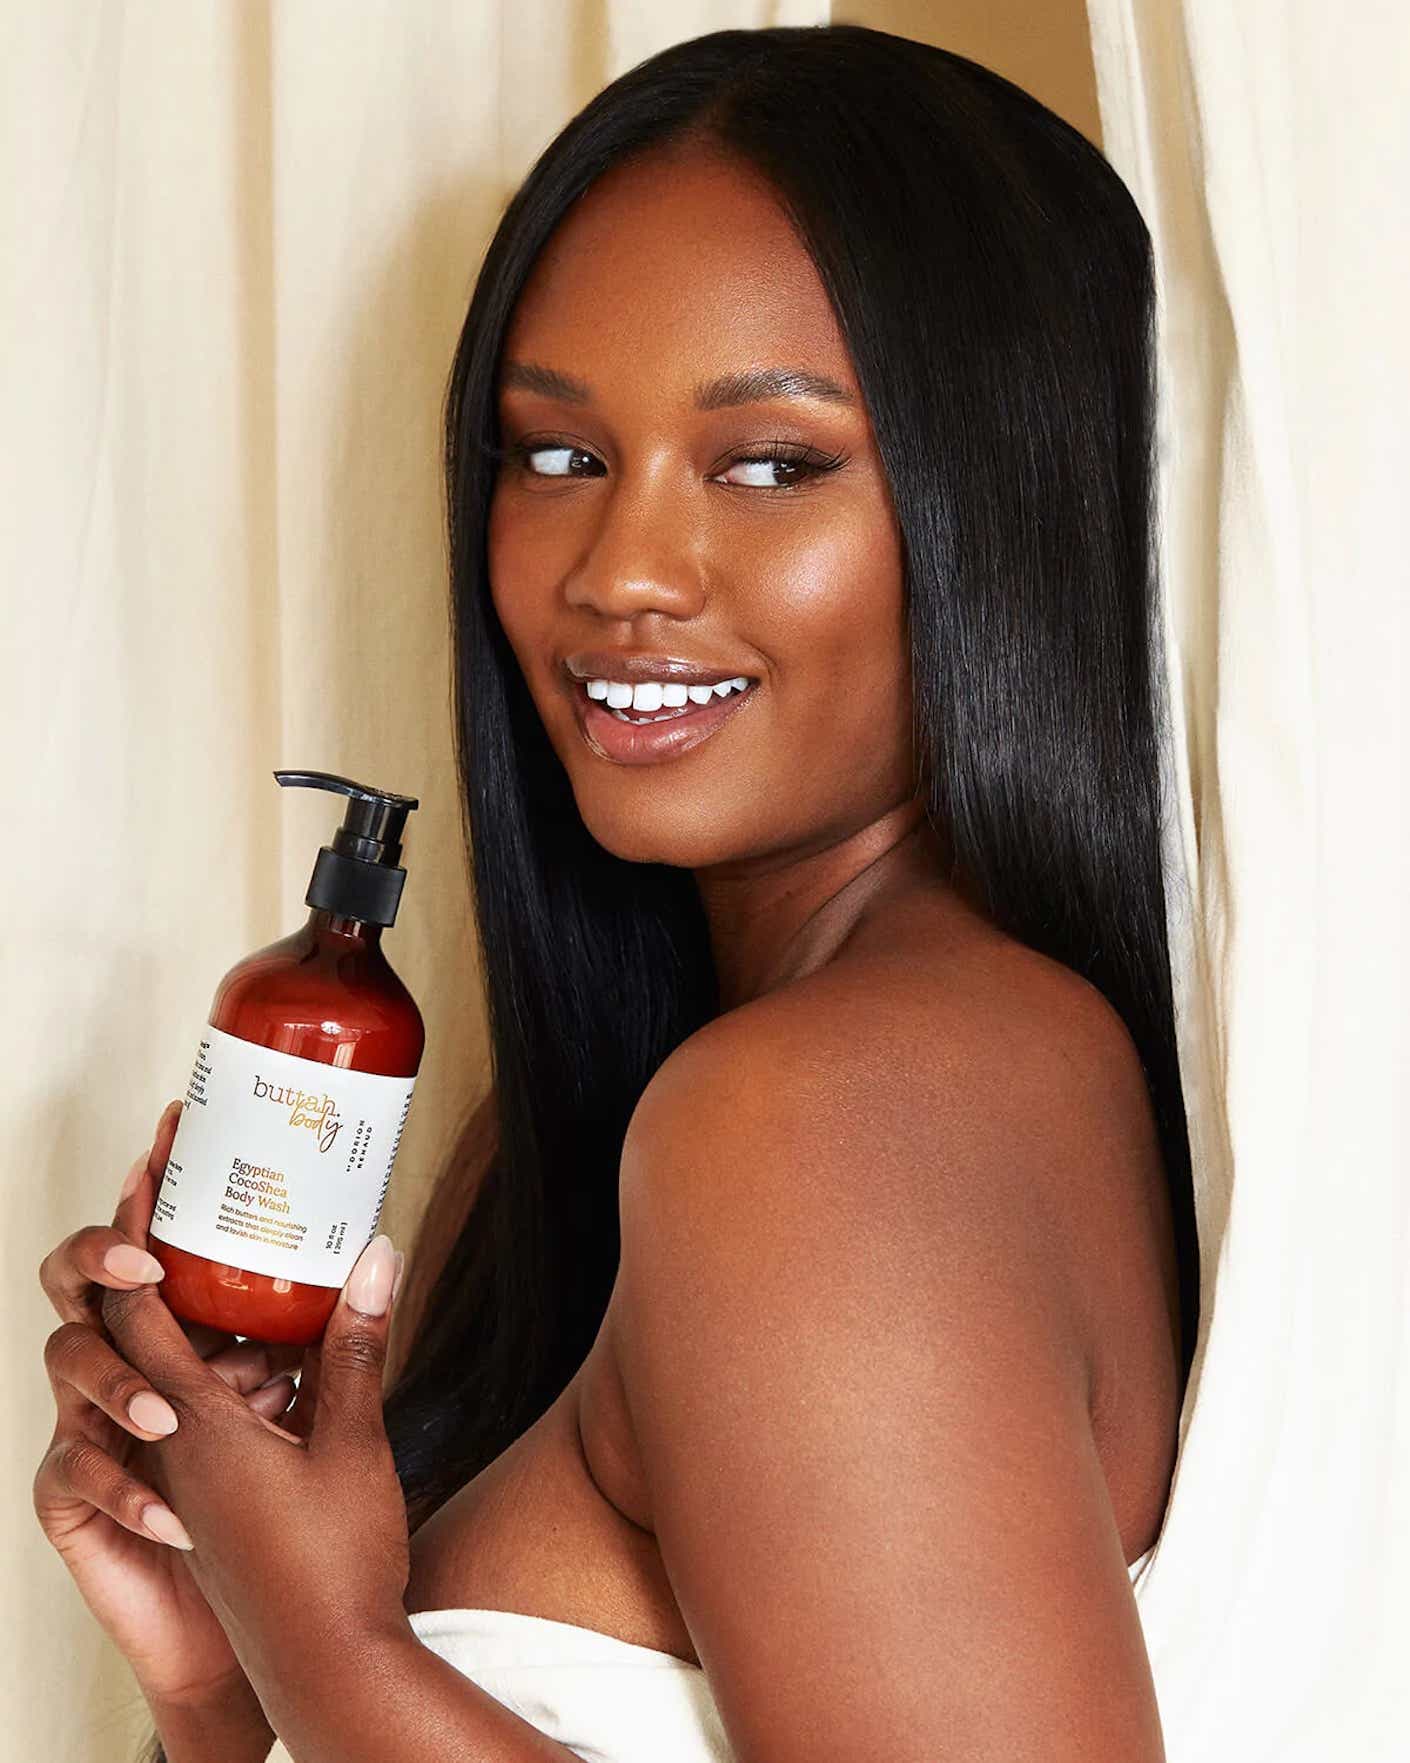 A woman smiles while holding a bottle of body wash.